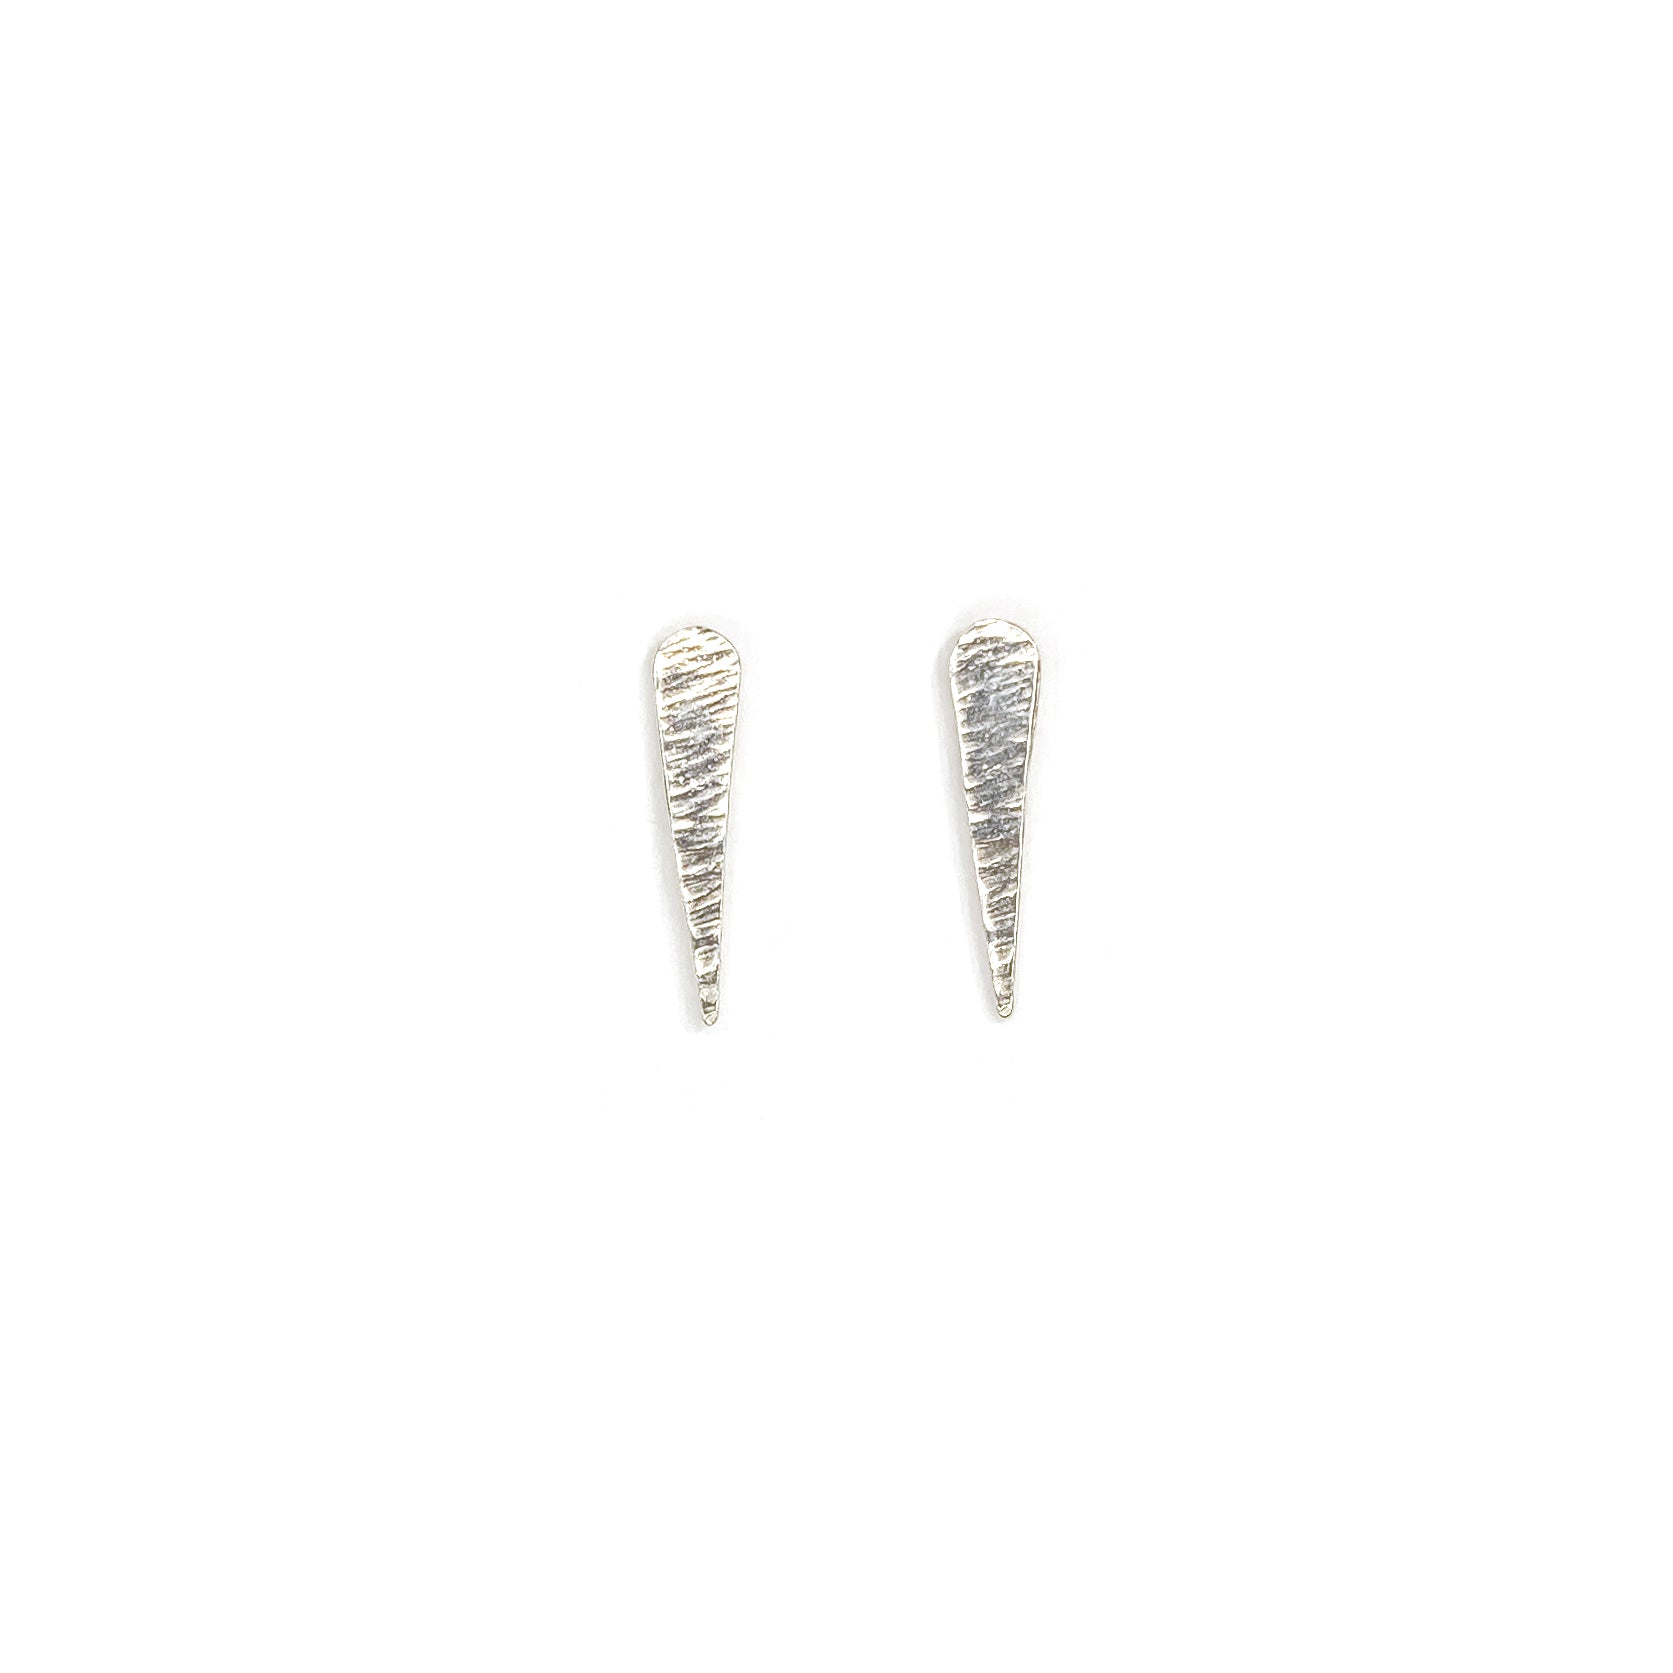 Silver, textured studs shaped like comets and their tails on a white background.